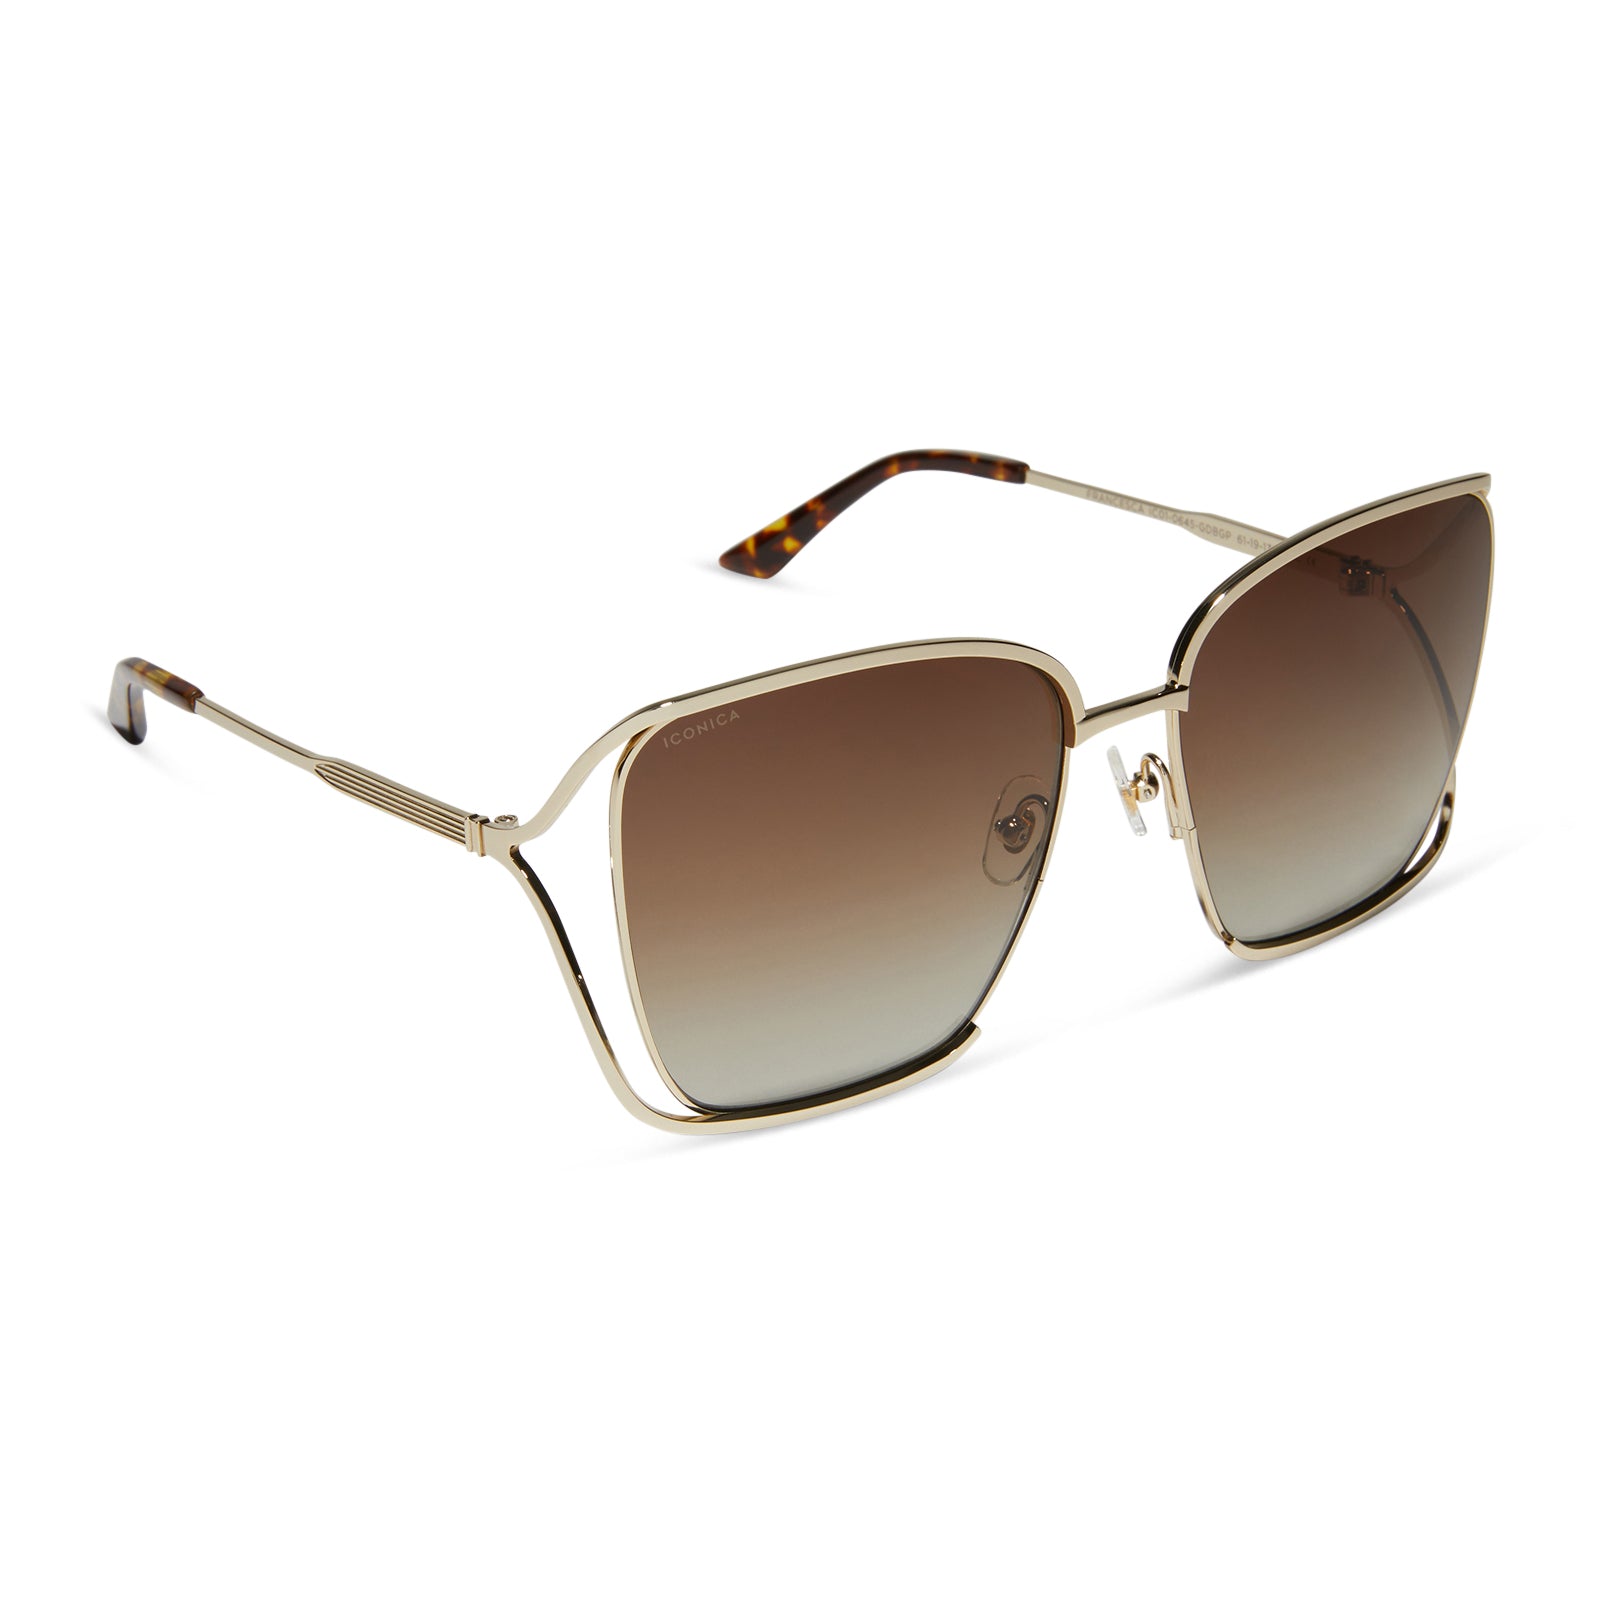 Image of FRANCESCA - GOLD WITH DARK TORTOISE + BROWN GRADIENT POLARIZED SUNGLASSES